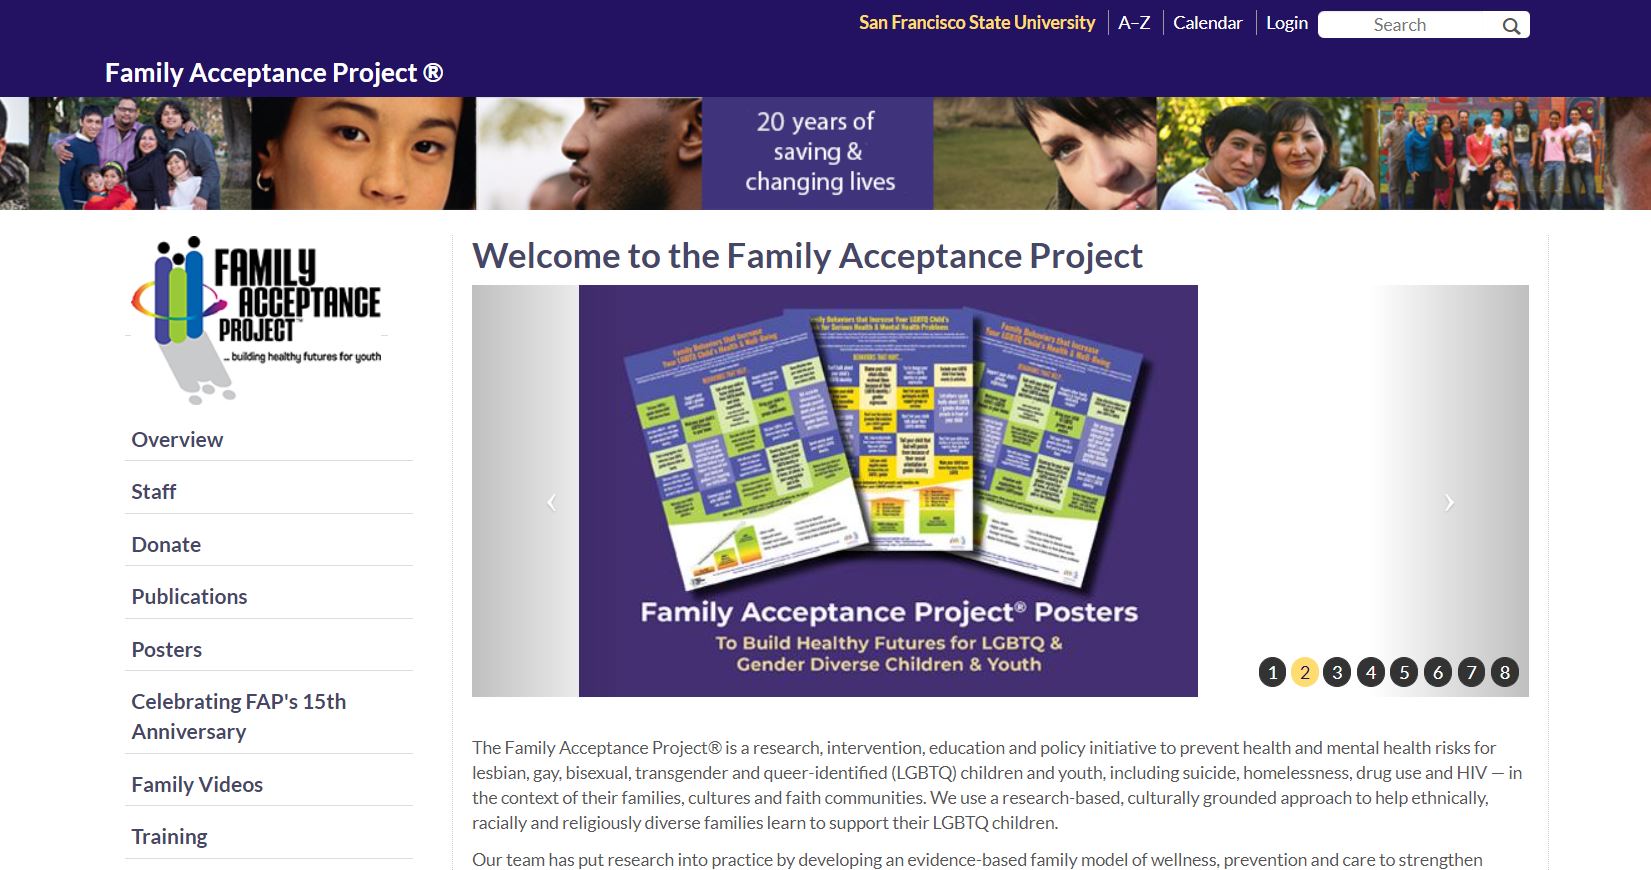 The Family Acceptance Project®